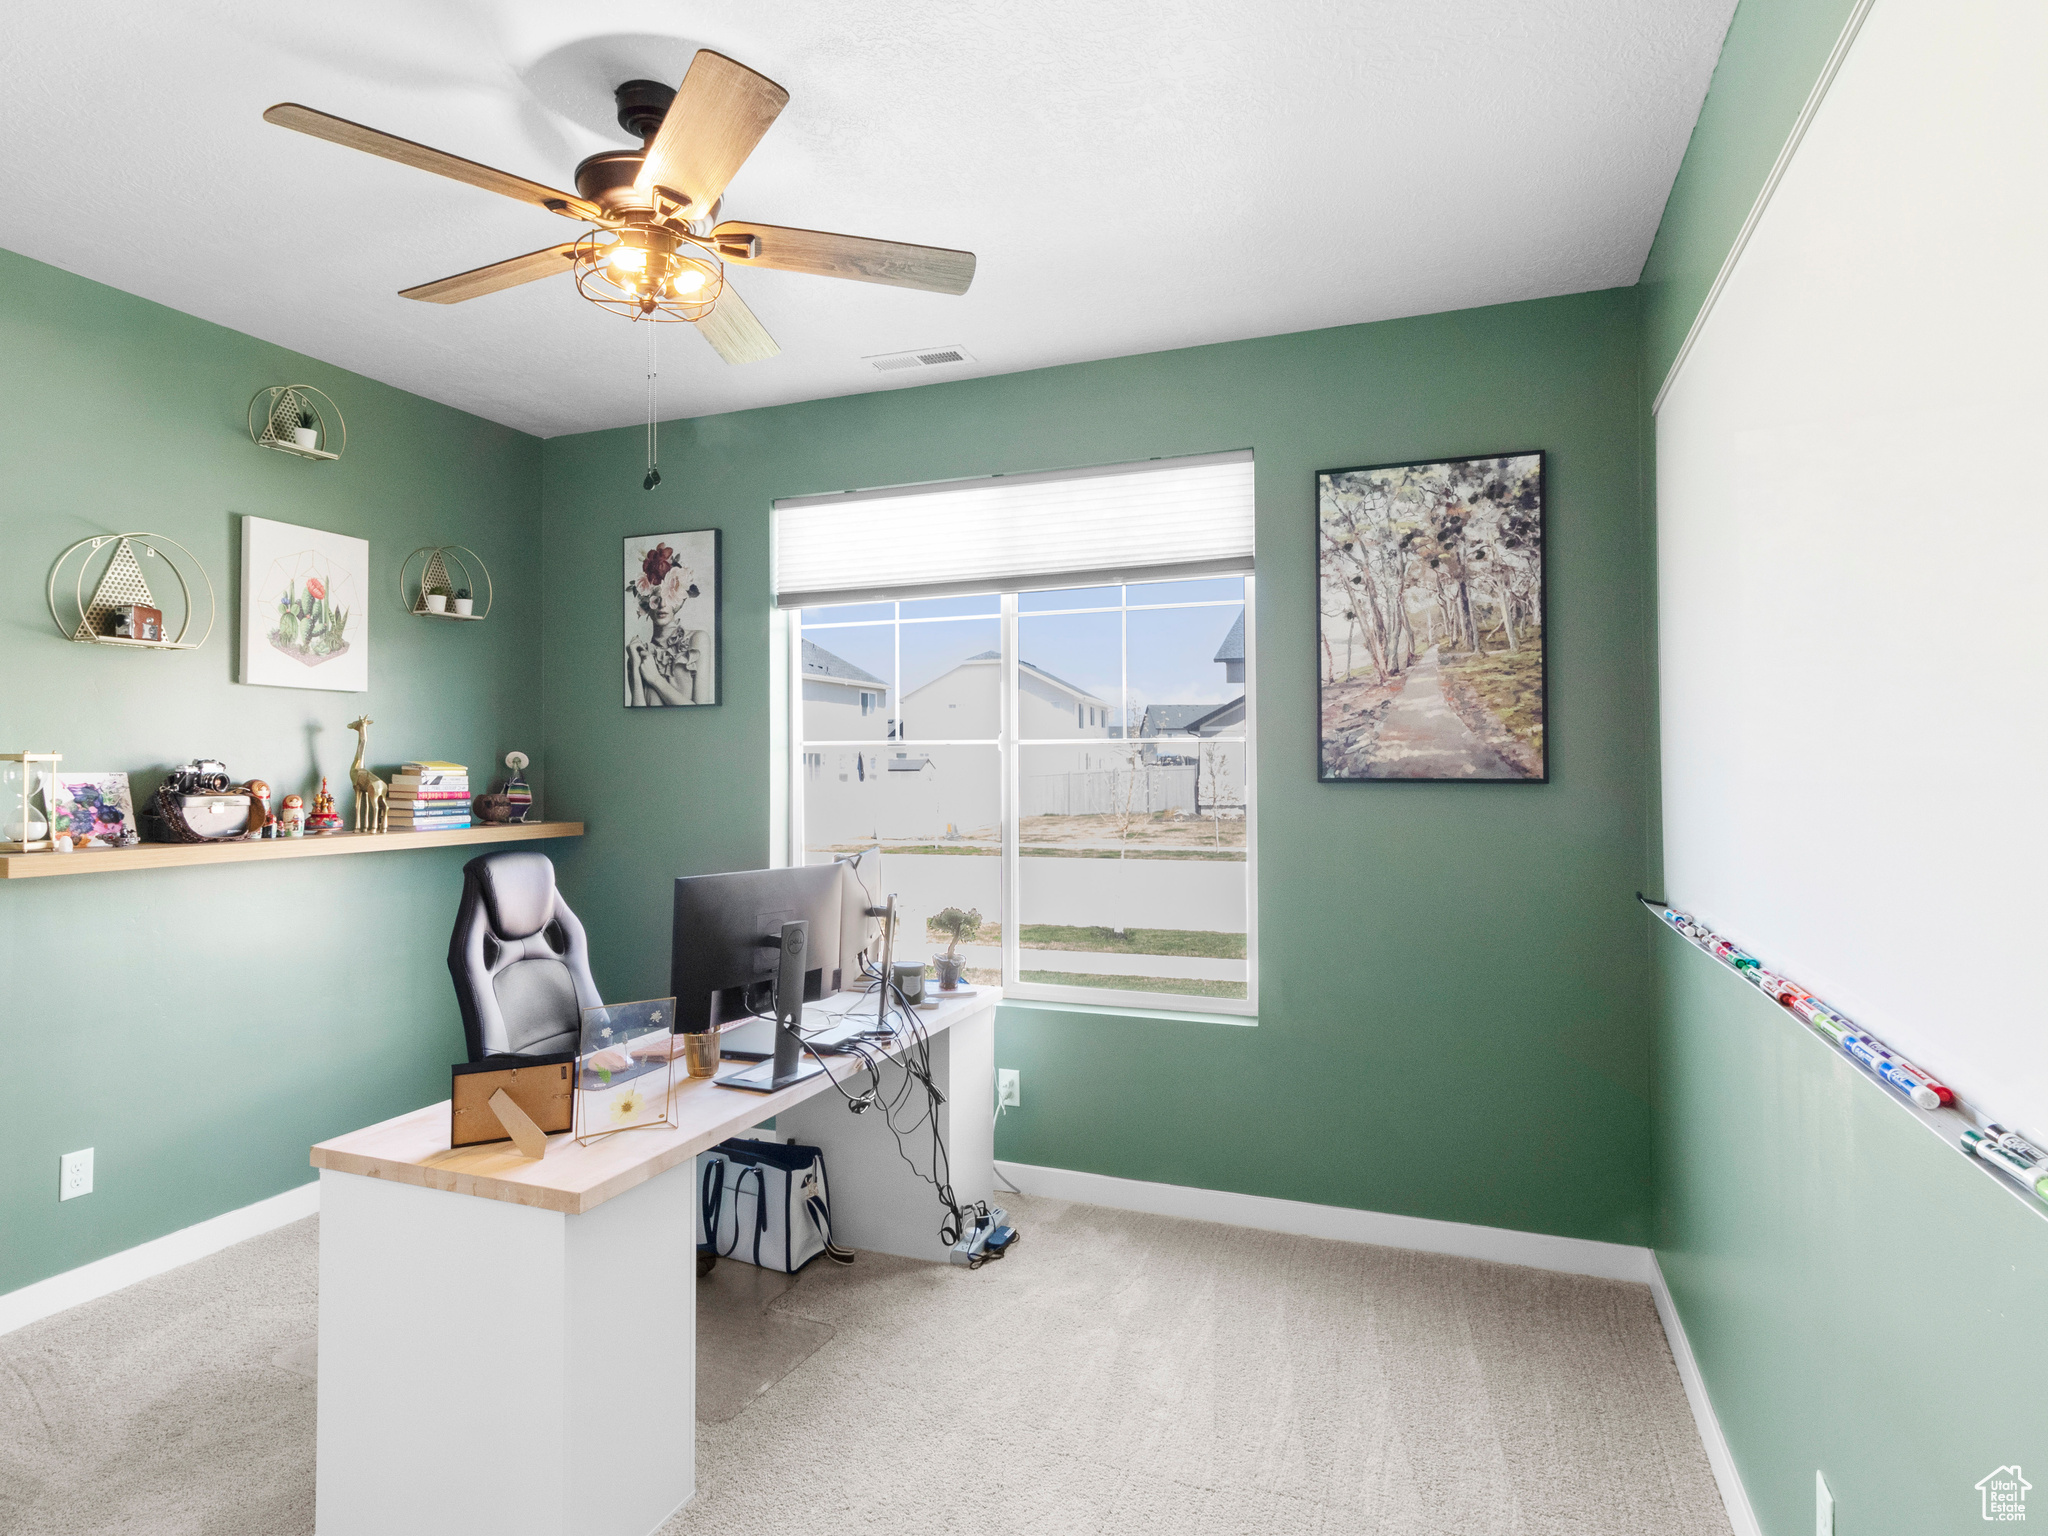 Carpeted office space featuring ceiling fan